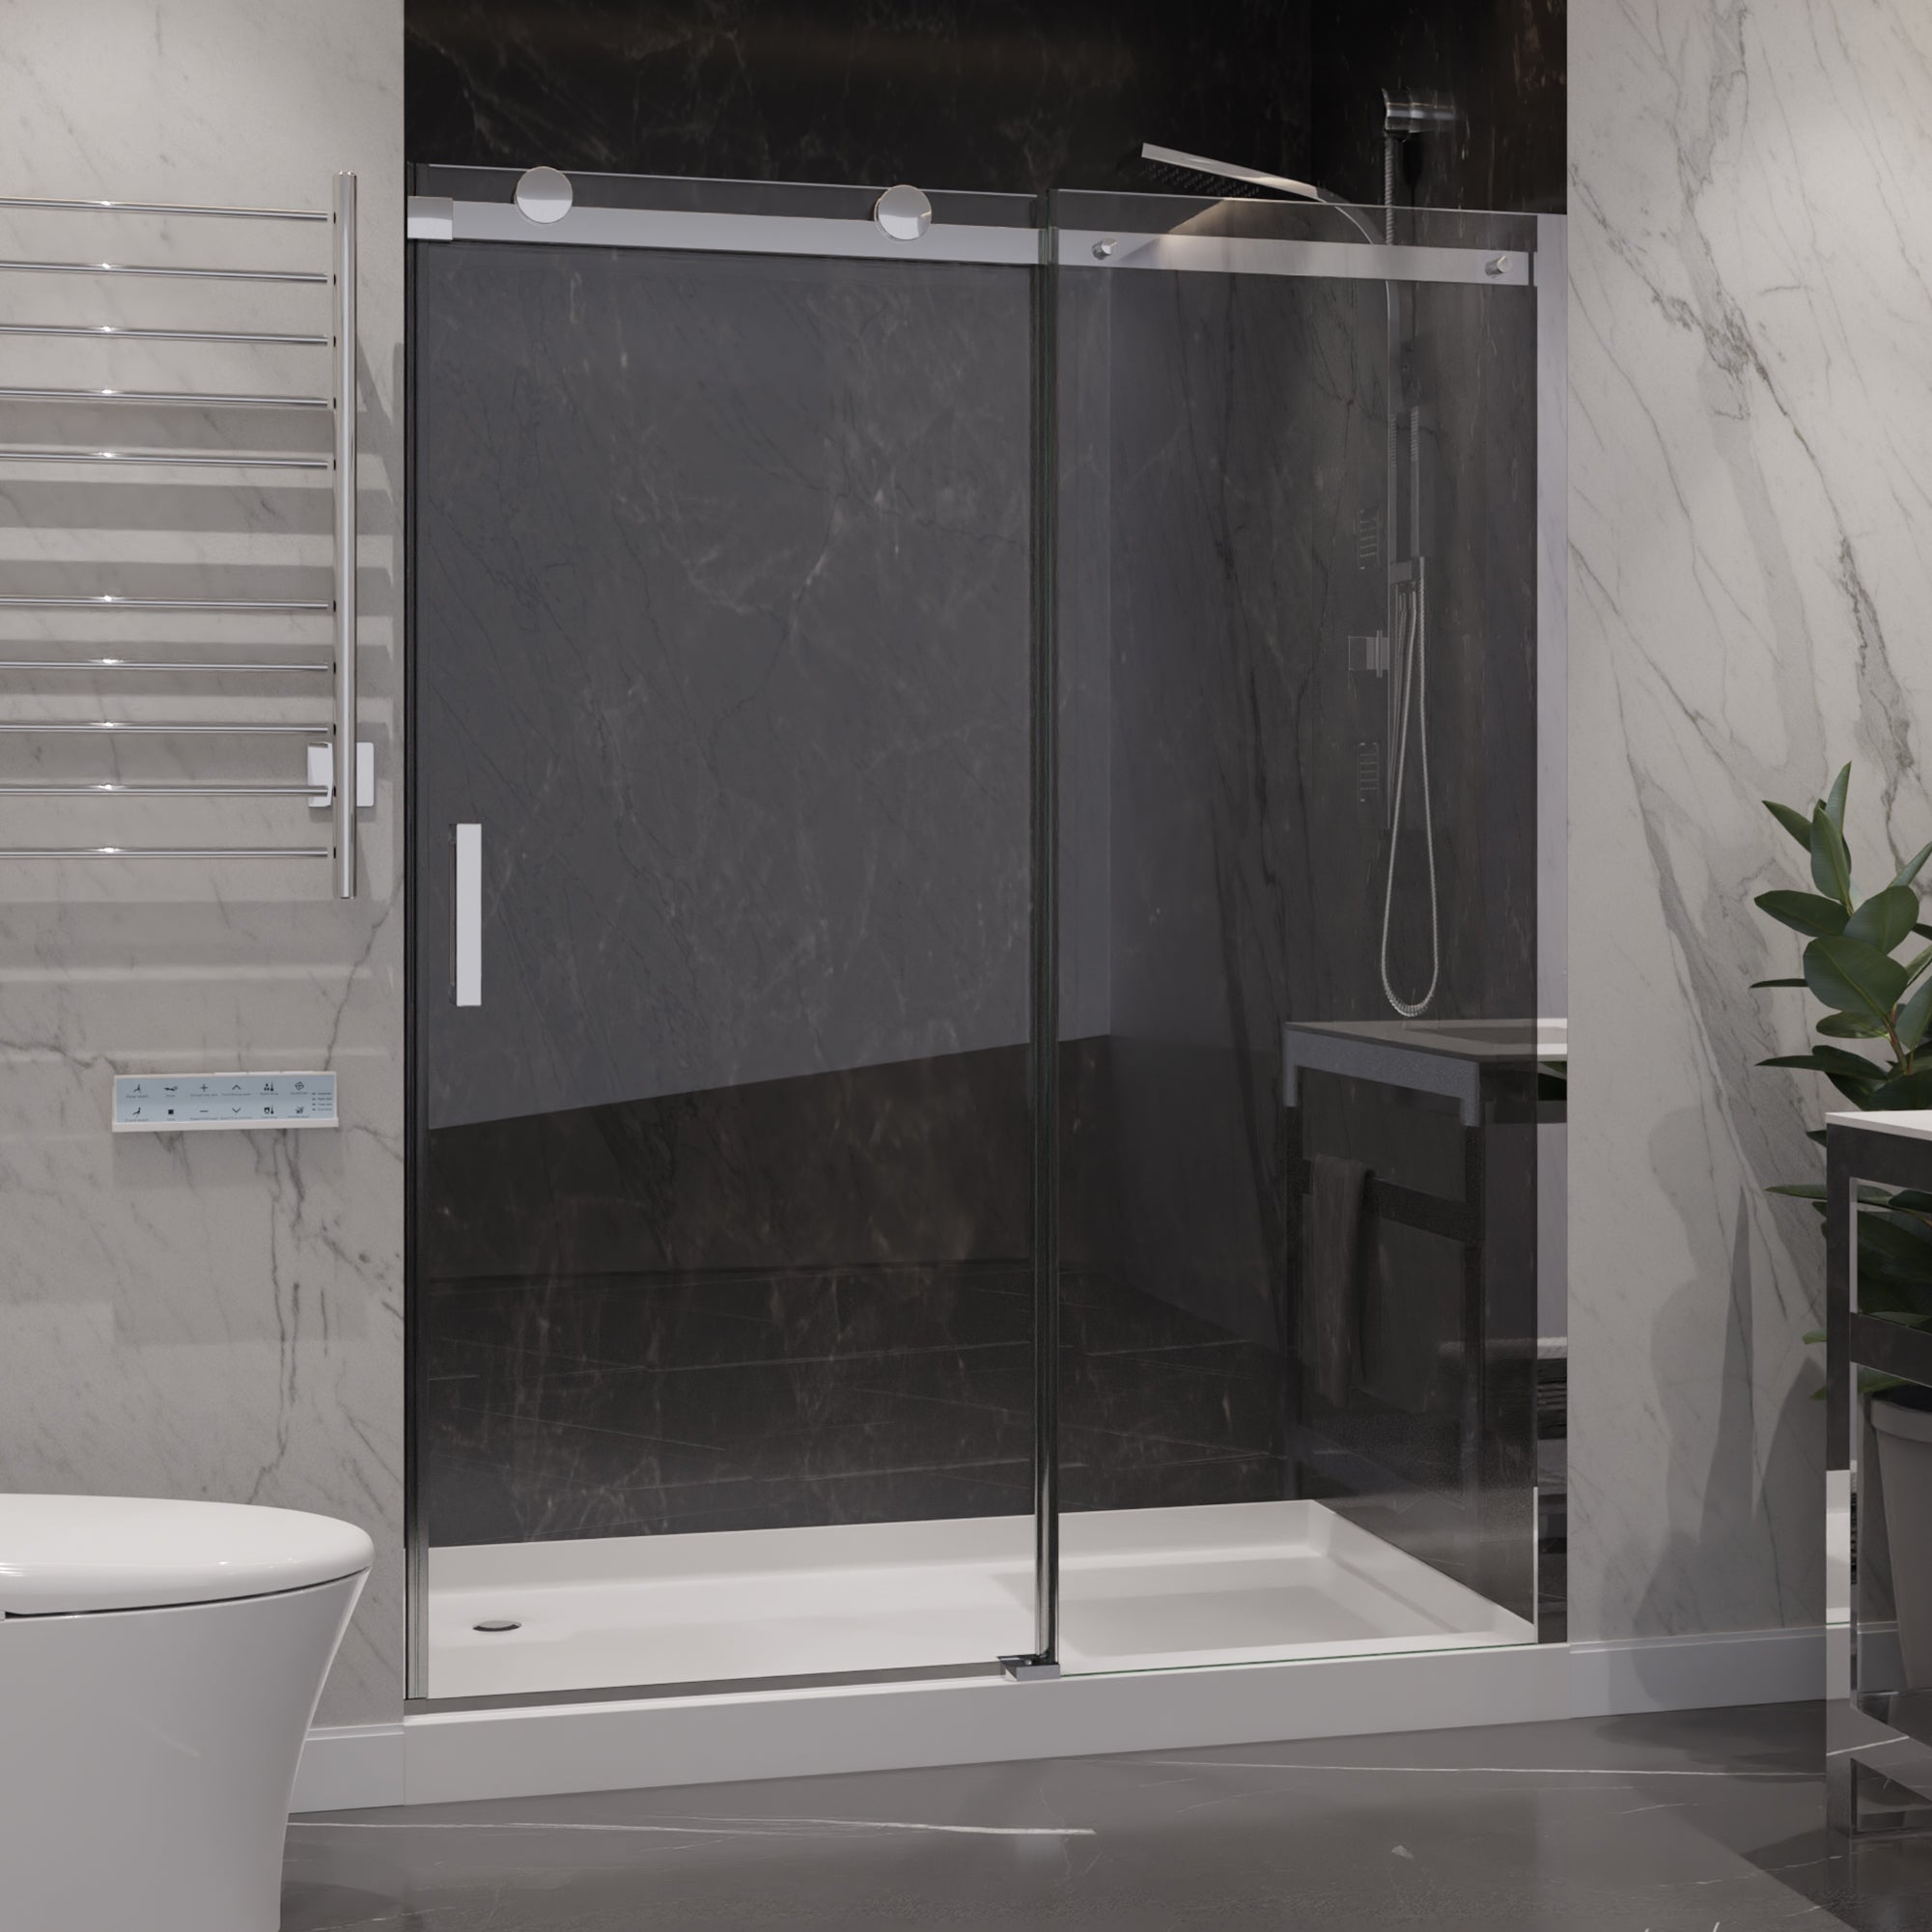 ANZZI 76 x 60 inch Frameless Tinted Shower Door in Brushed Nickel